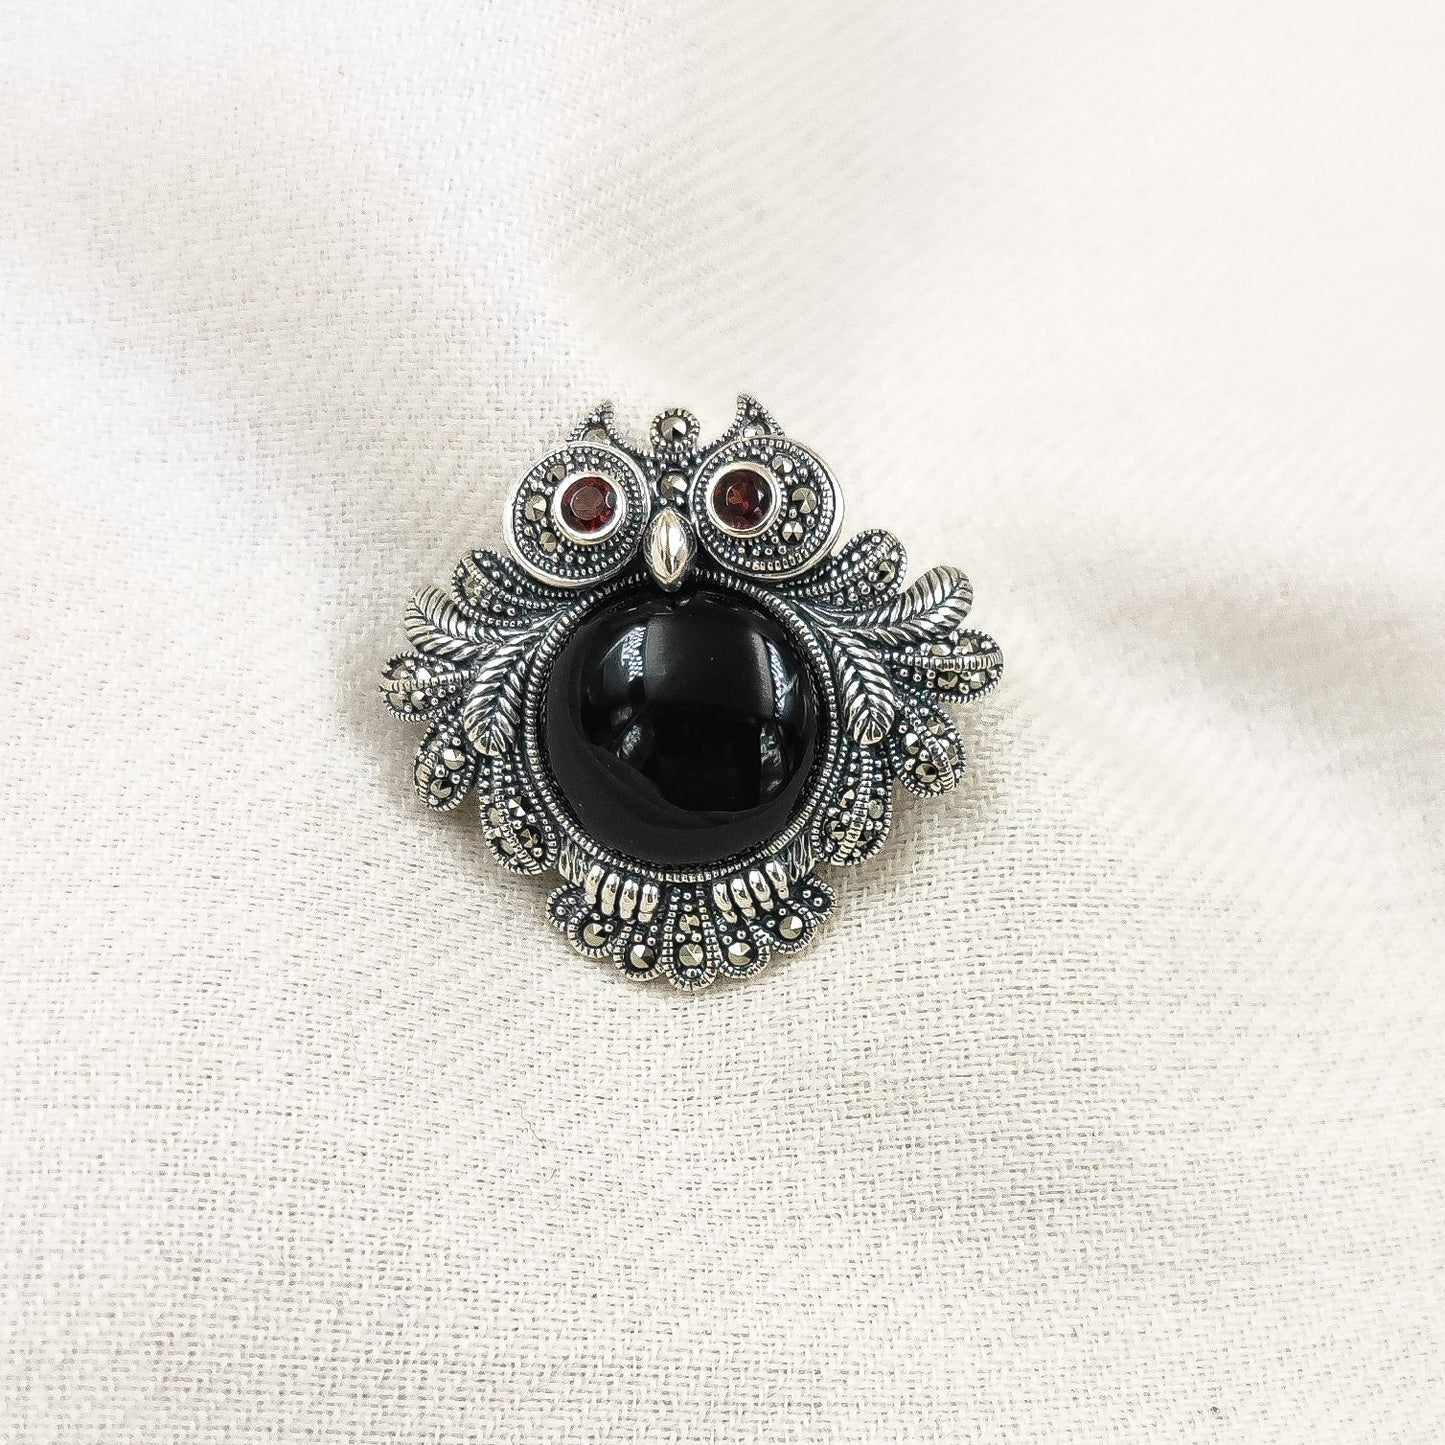 Silver Jewelry Brooches and Lapel Pins by Jauhri 92.5 Silver - Marcasite Round Owl Black Brooch And Pendant